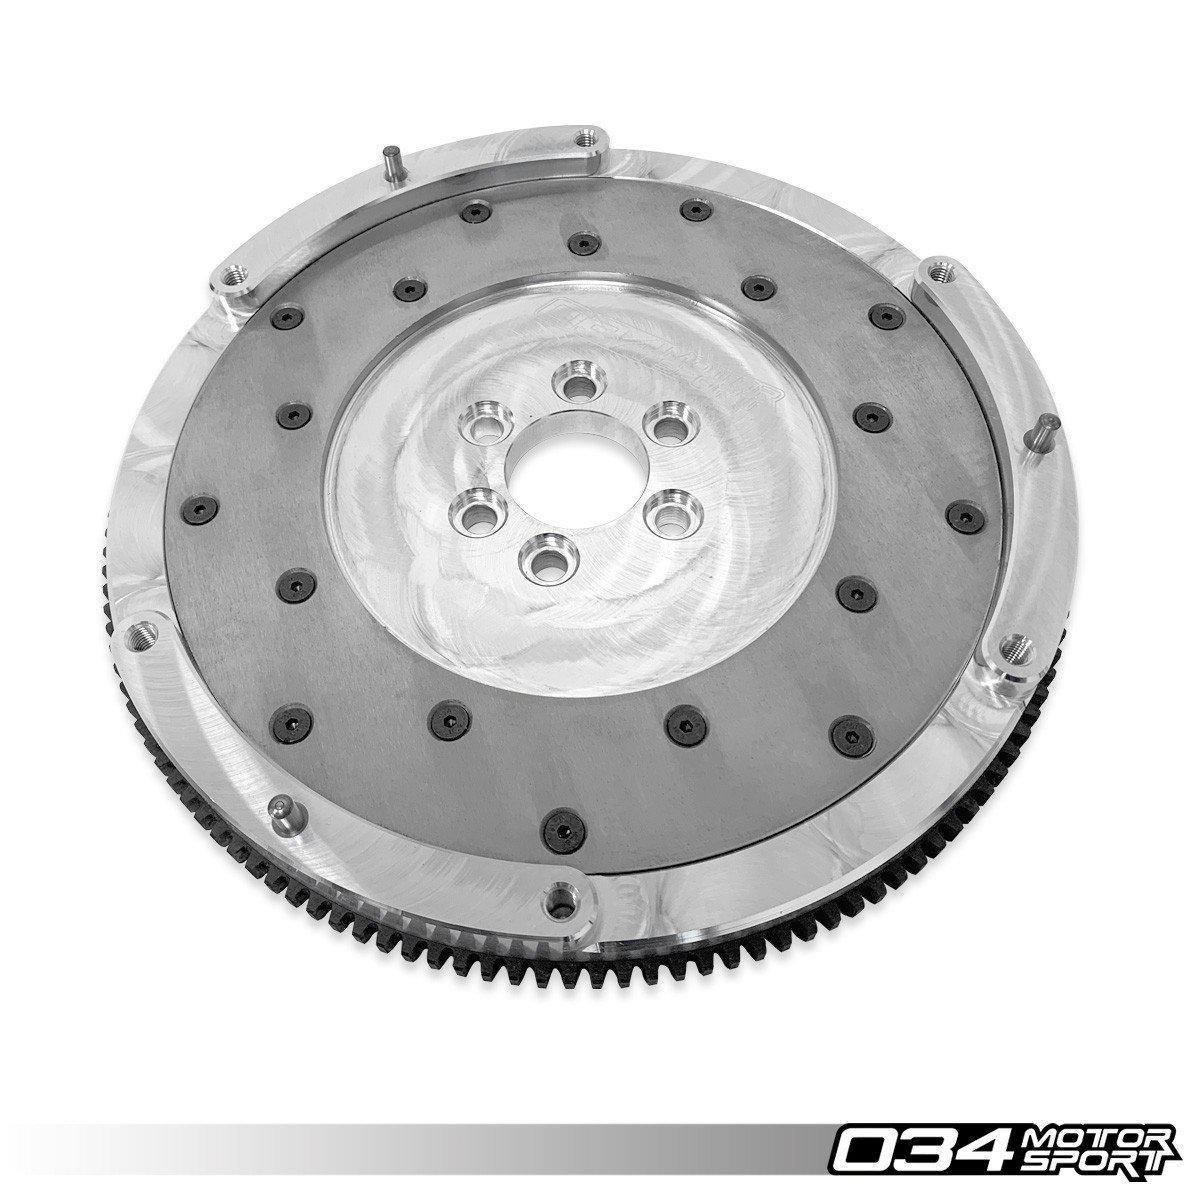 Flywheel, Aluminum, Lightweight, B5/B6 Audi A4 1.8T For Use With Audi B7 RS4 Clutch-A Little Tuning Co